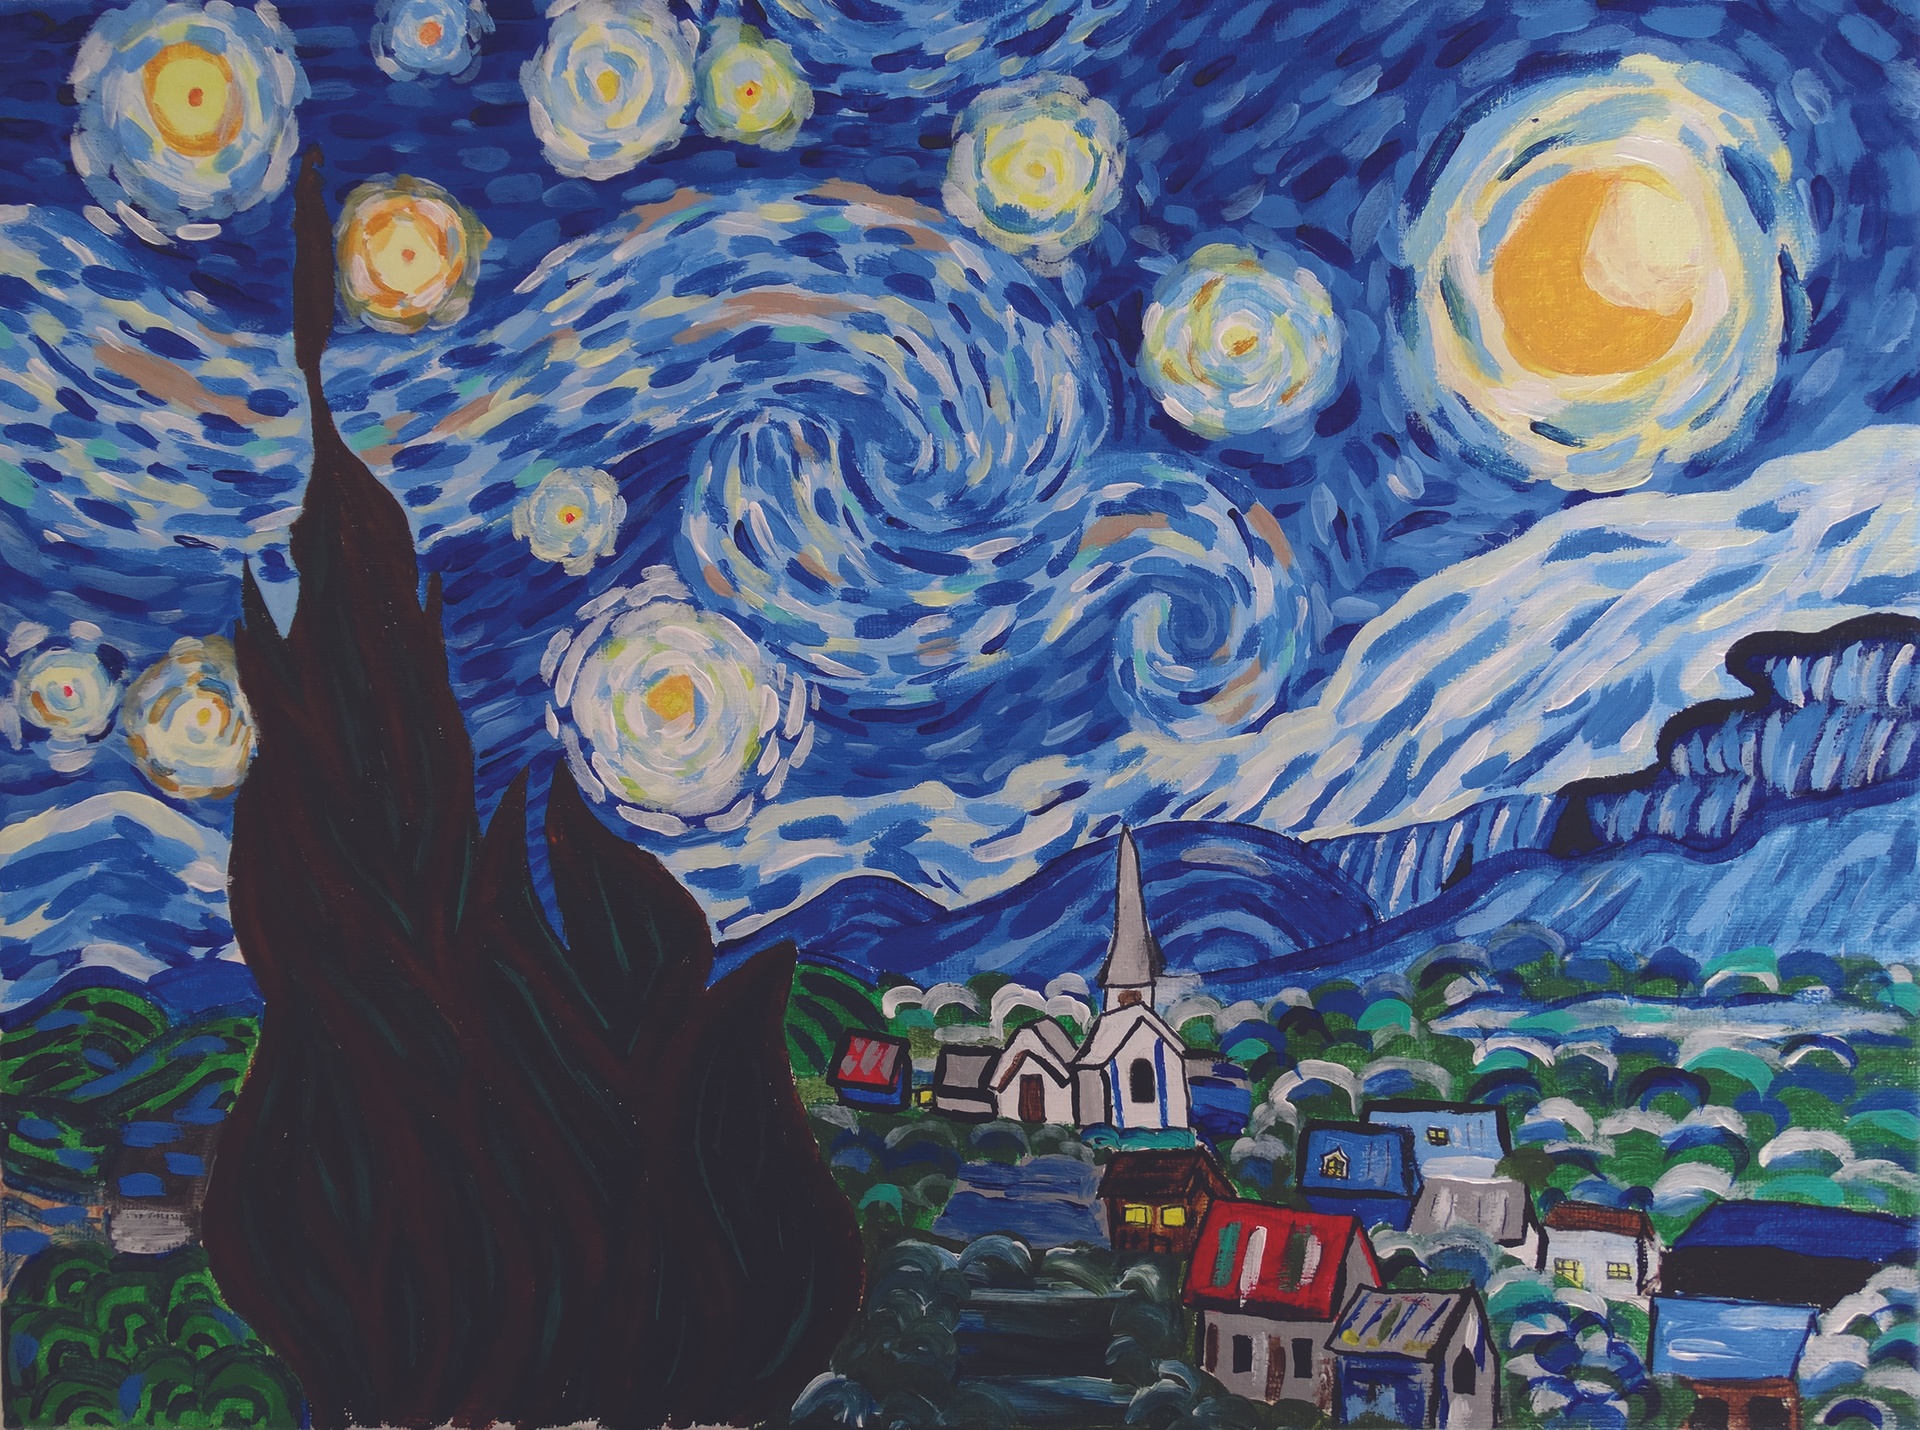 student replica of Vincent Van Gough's starry night painting